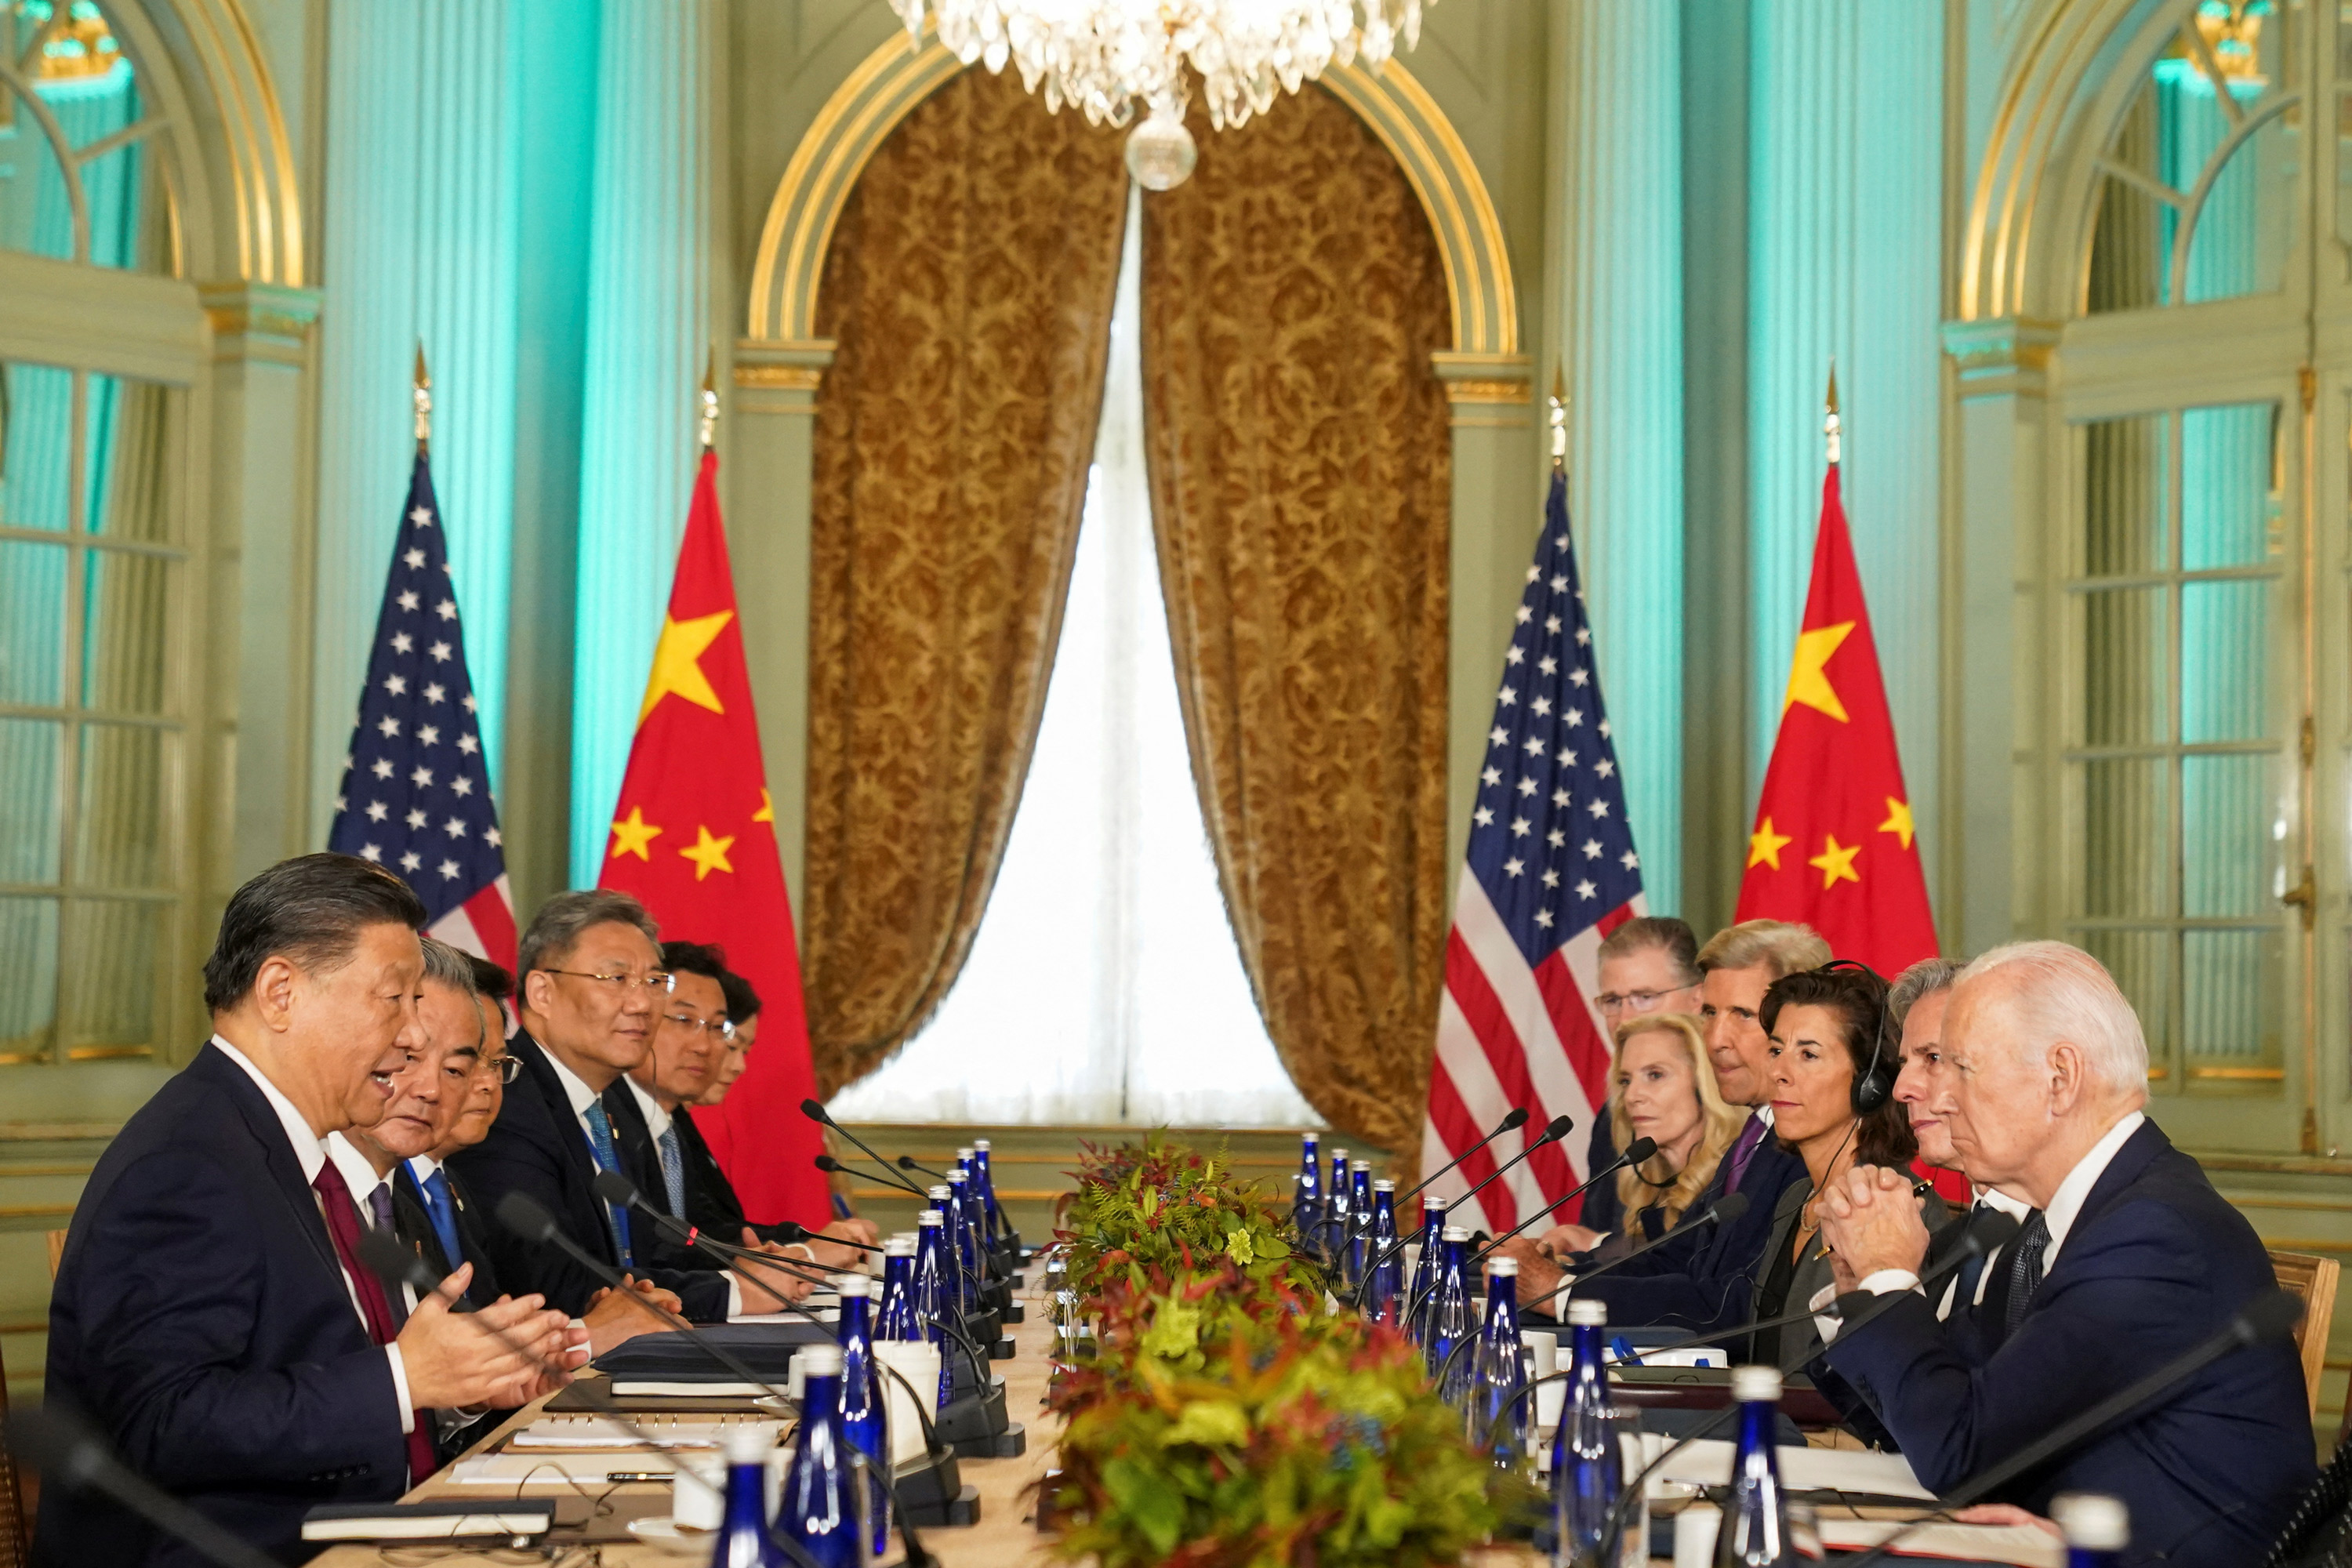 US President Joe Biden and Chinese President Xi Jinping attend a bilateral meeting at Filoli estate on the sidelines of the Asia-Pacific Economic Cooperation (APEC) summit, in Woodside, California, on November 15.